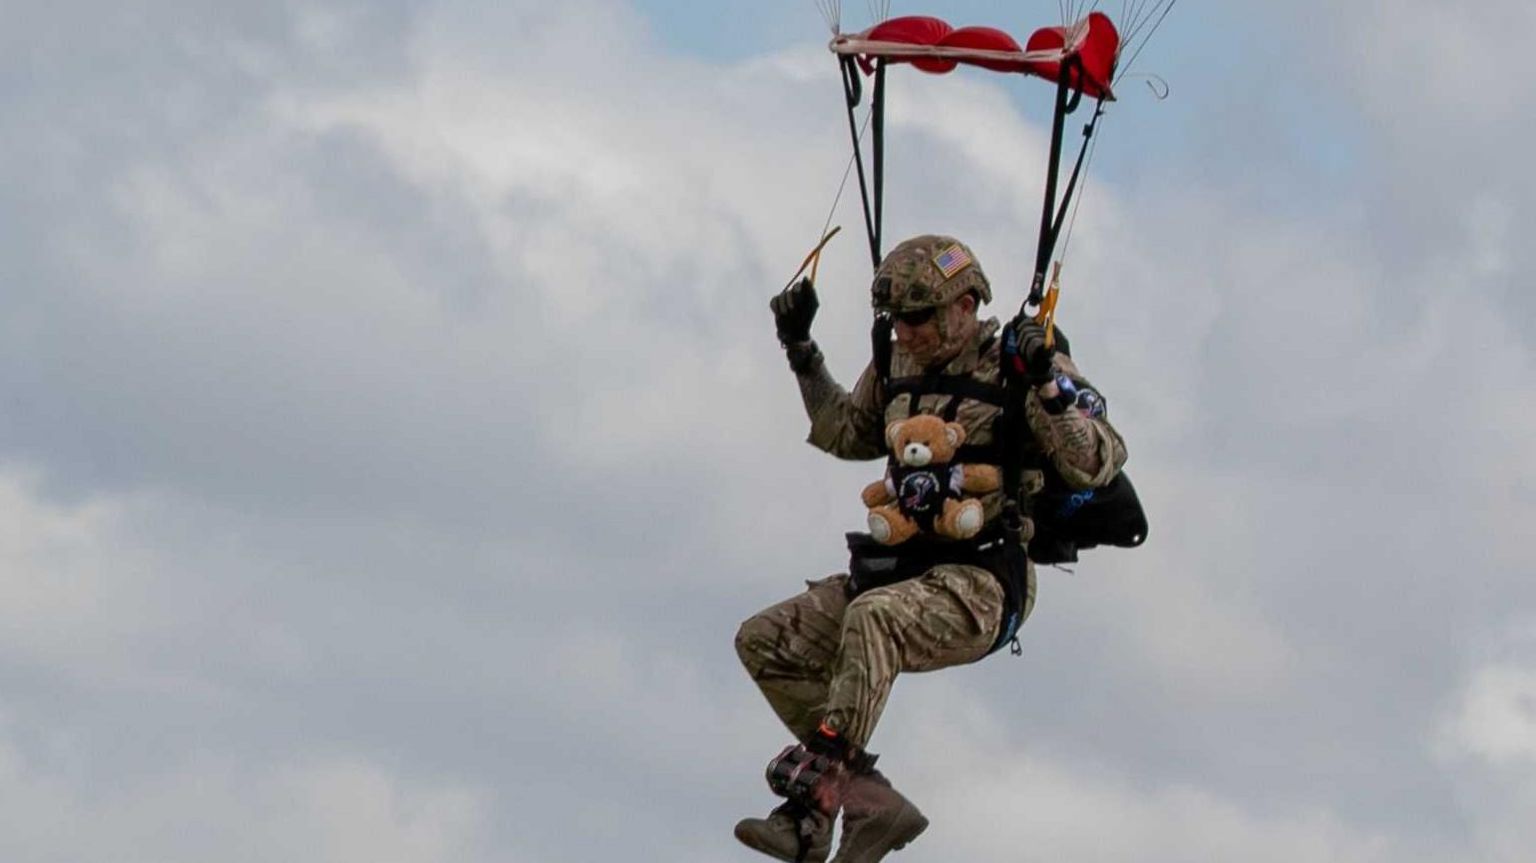 Army member skydiving with toy teddy bear